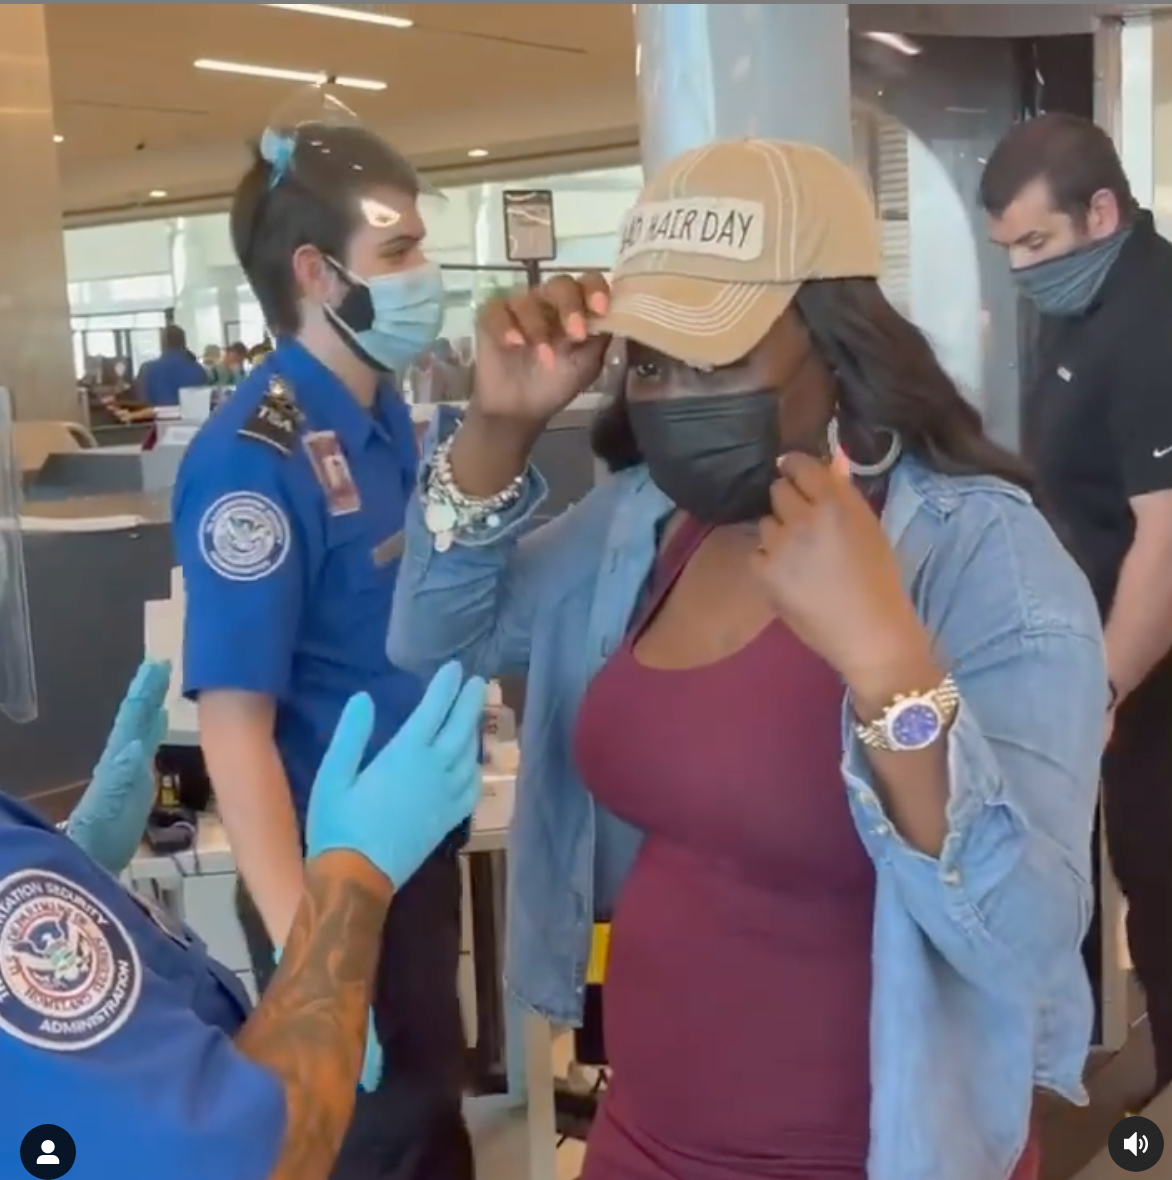 Brinta was asked by airport security to show what was underneath her hat, which was her wig cap.